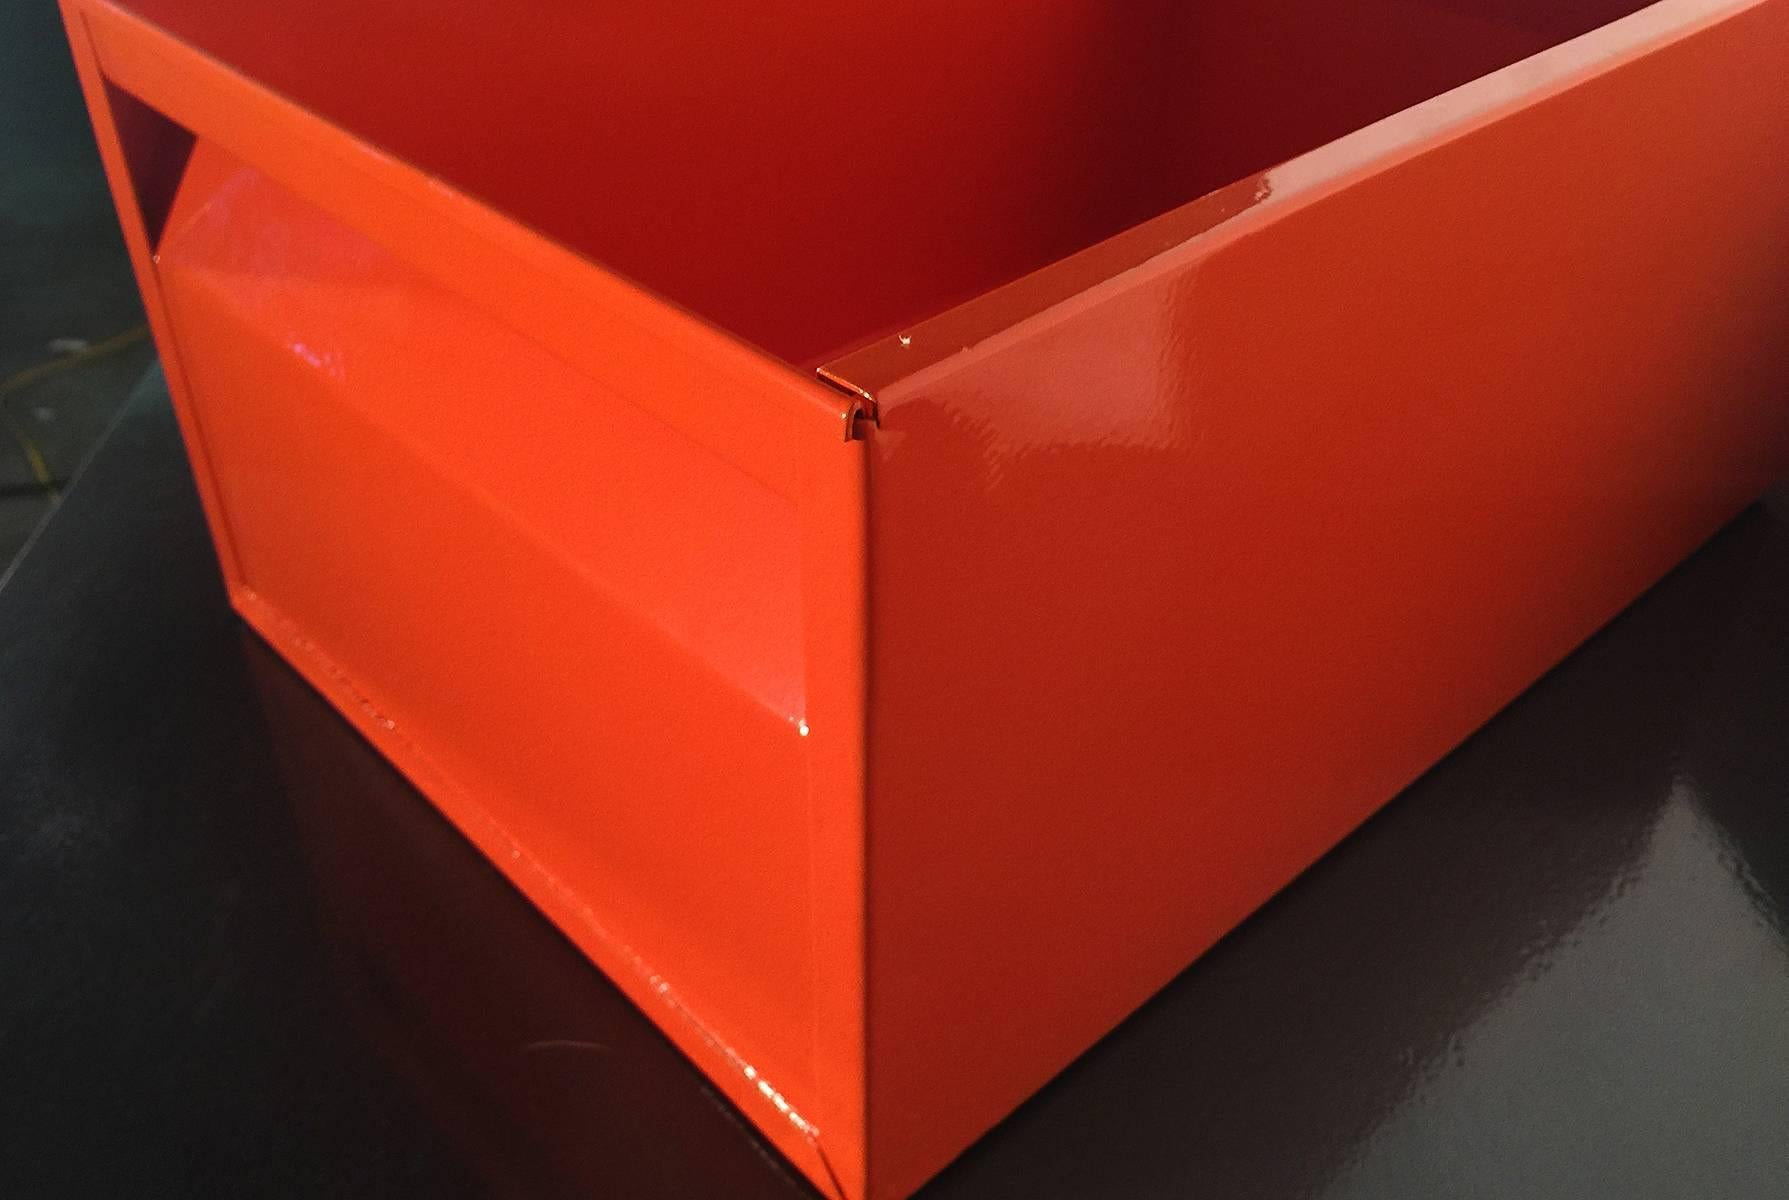 We refinished our fantastic 1940s Industrial storage bin in a gloss orange powder coat. This Classic, heavy-duty steel organizer is sure to keep your office in tip-top shape.